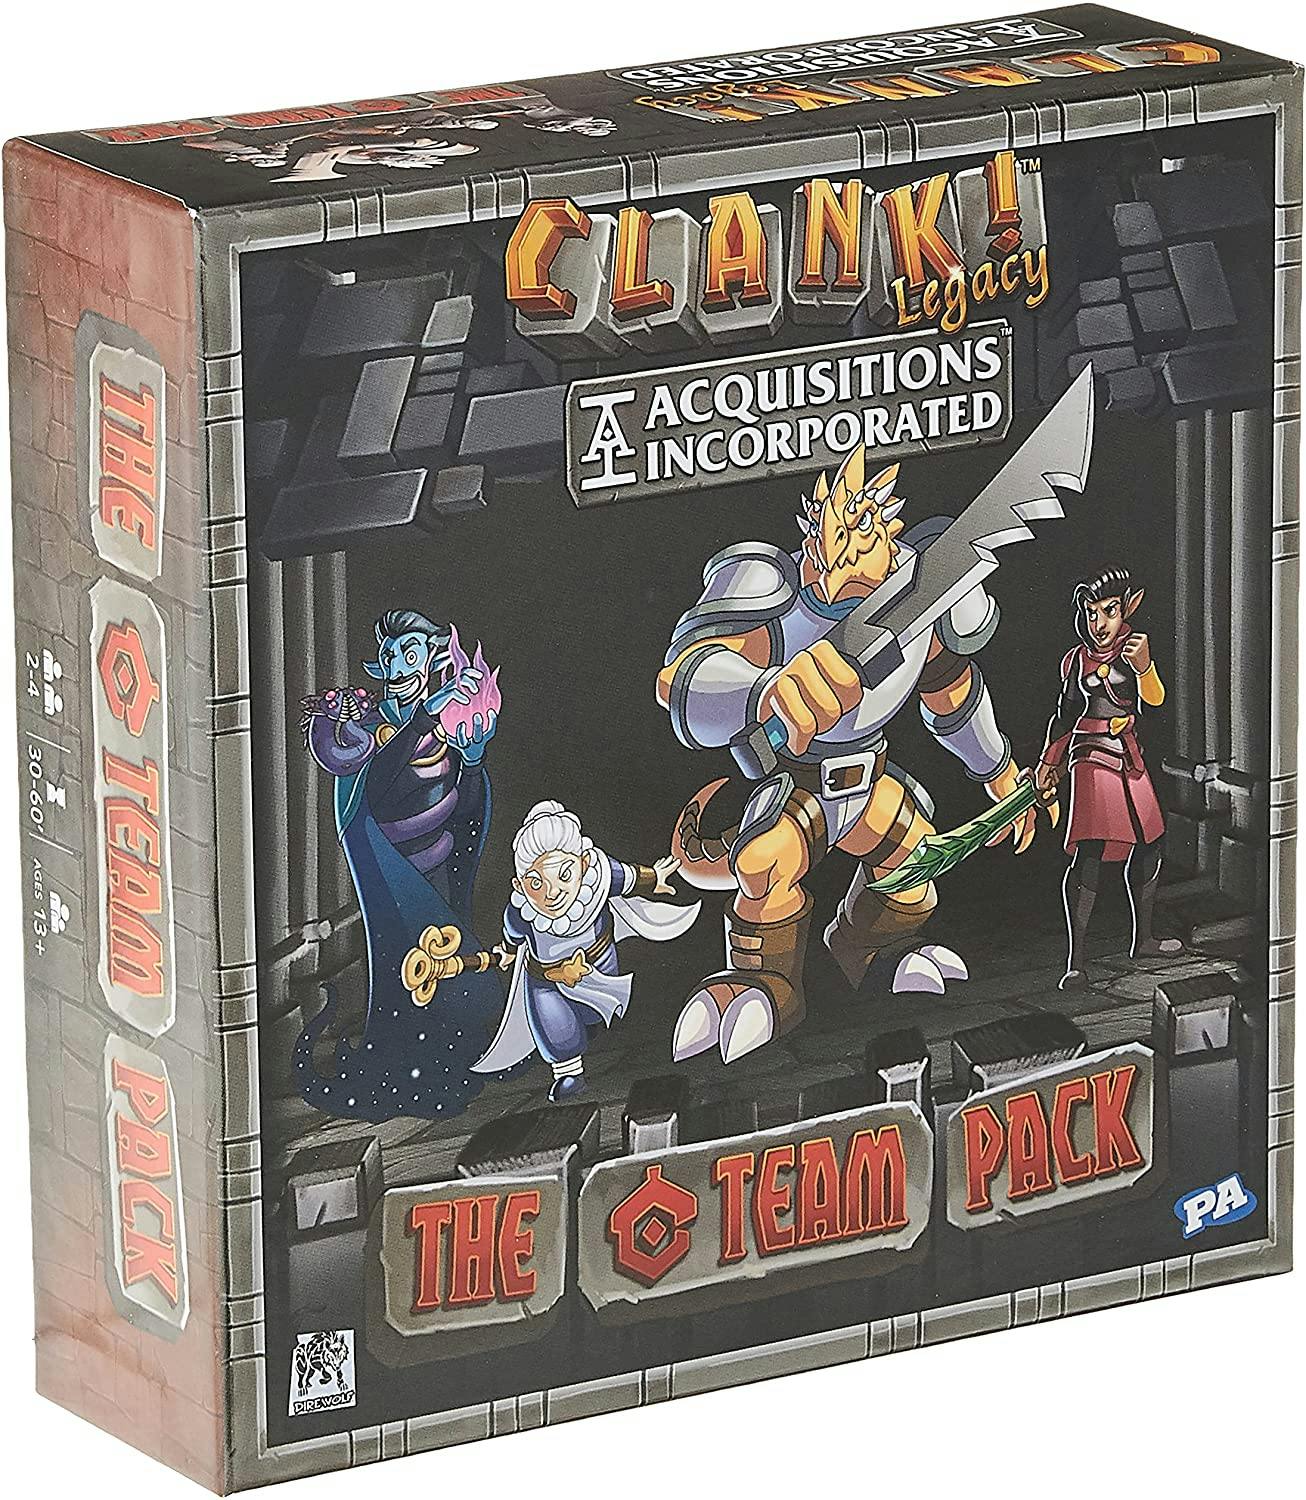 Clank! Legacy - Acquisitions Incorporated - The "C" Team Pack